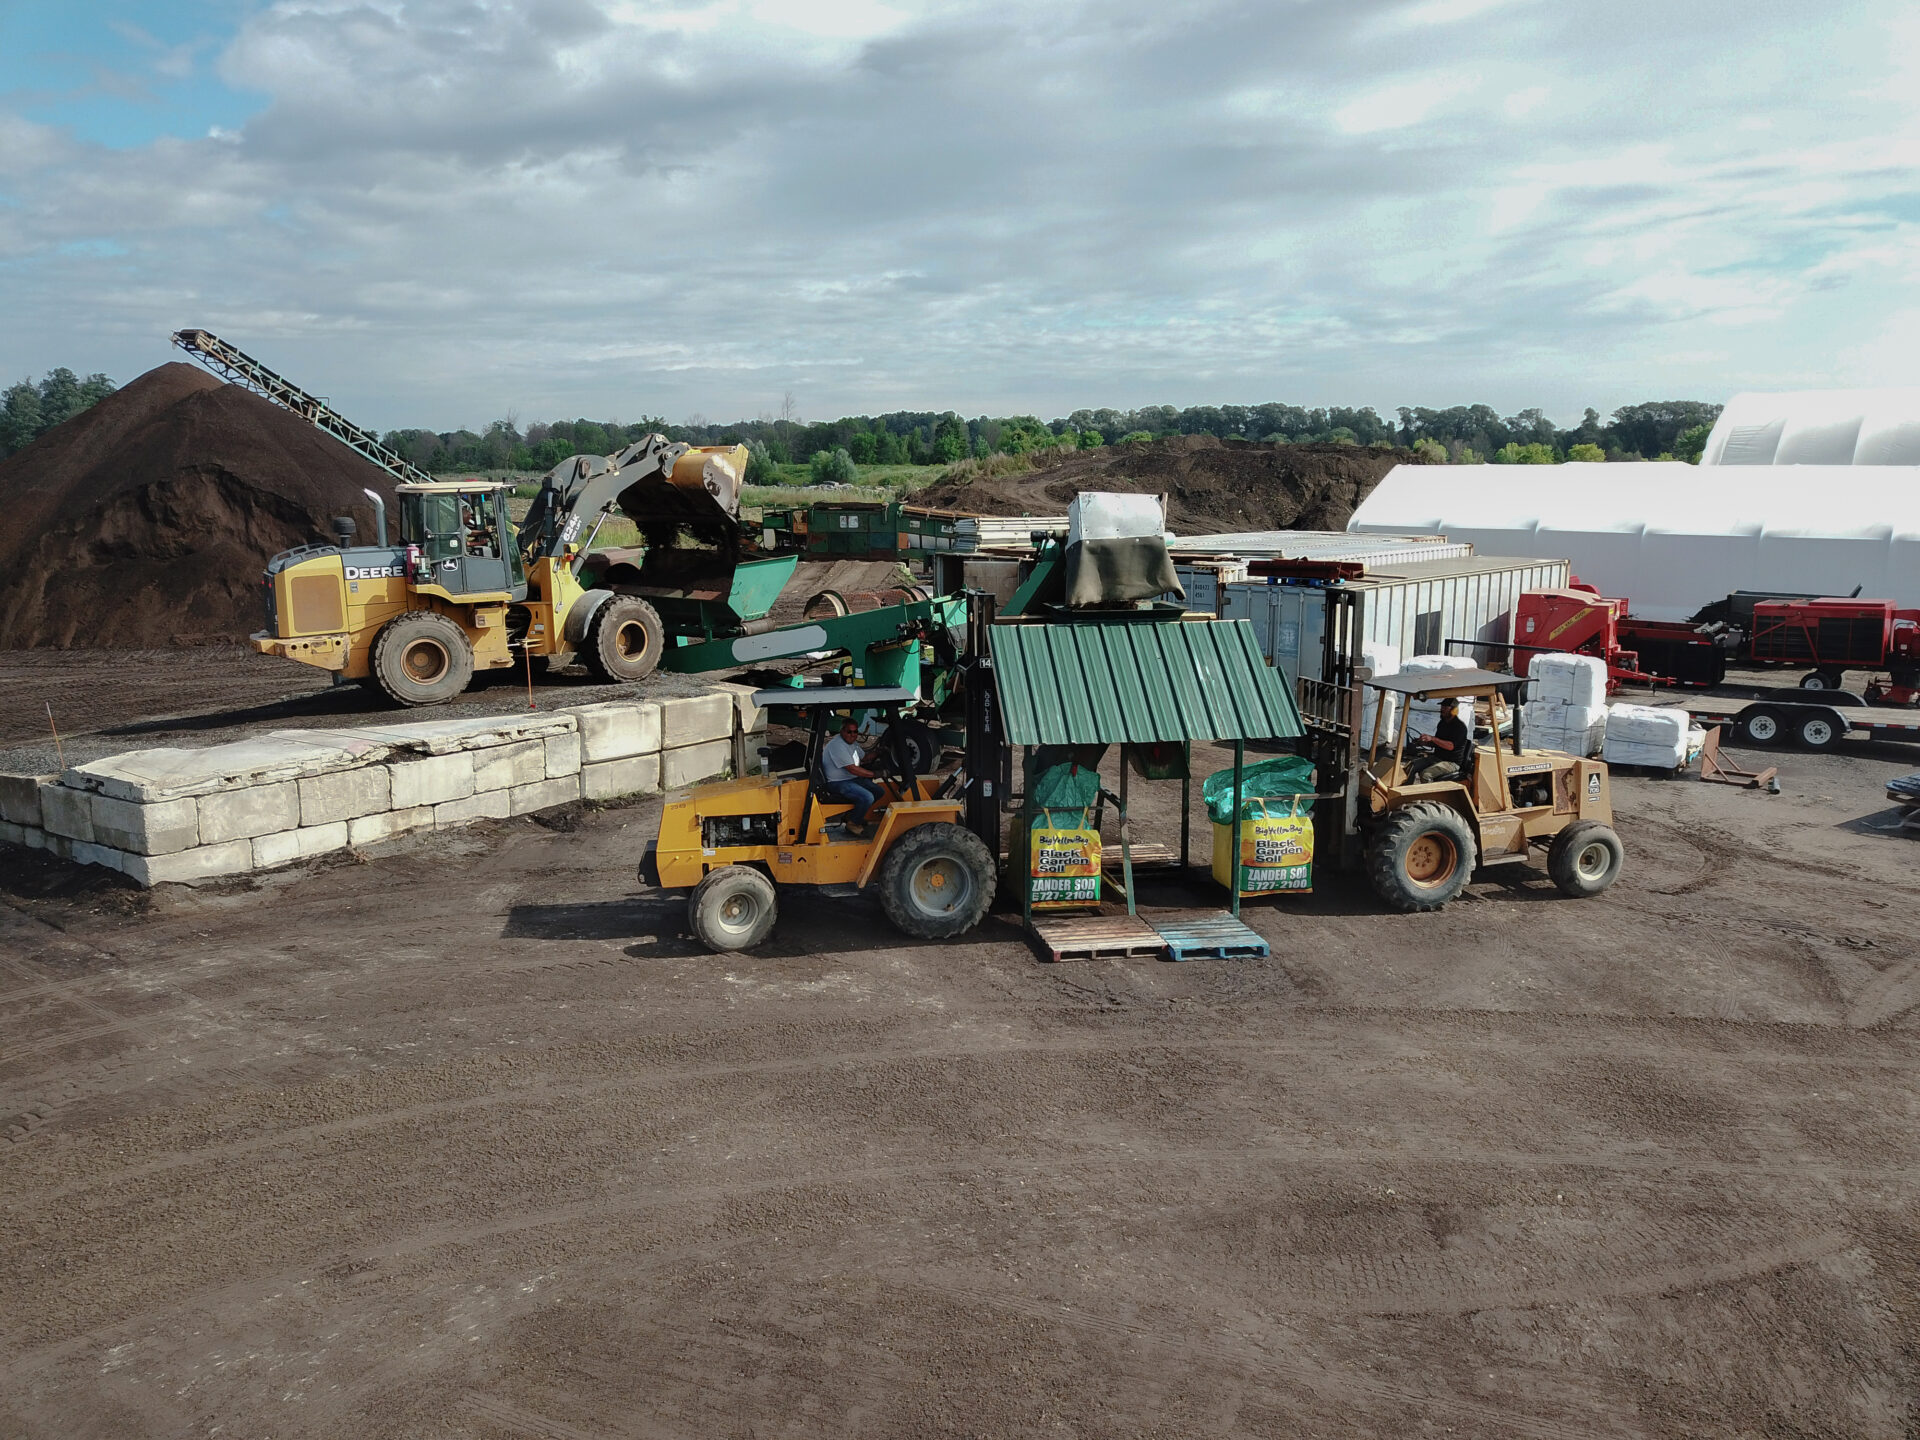 An industrial site with heavy machinery: loaders moving organic material, packaged goods on pallets, and a large compost pile in the background.